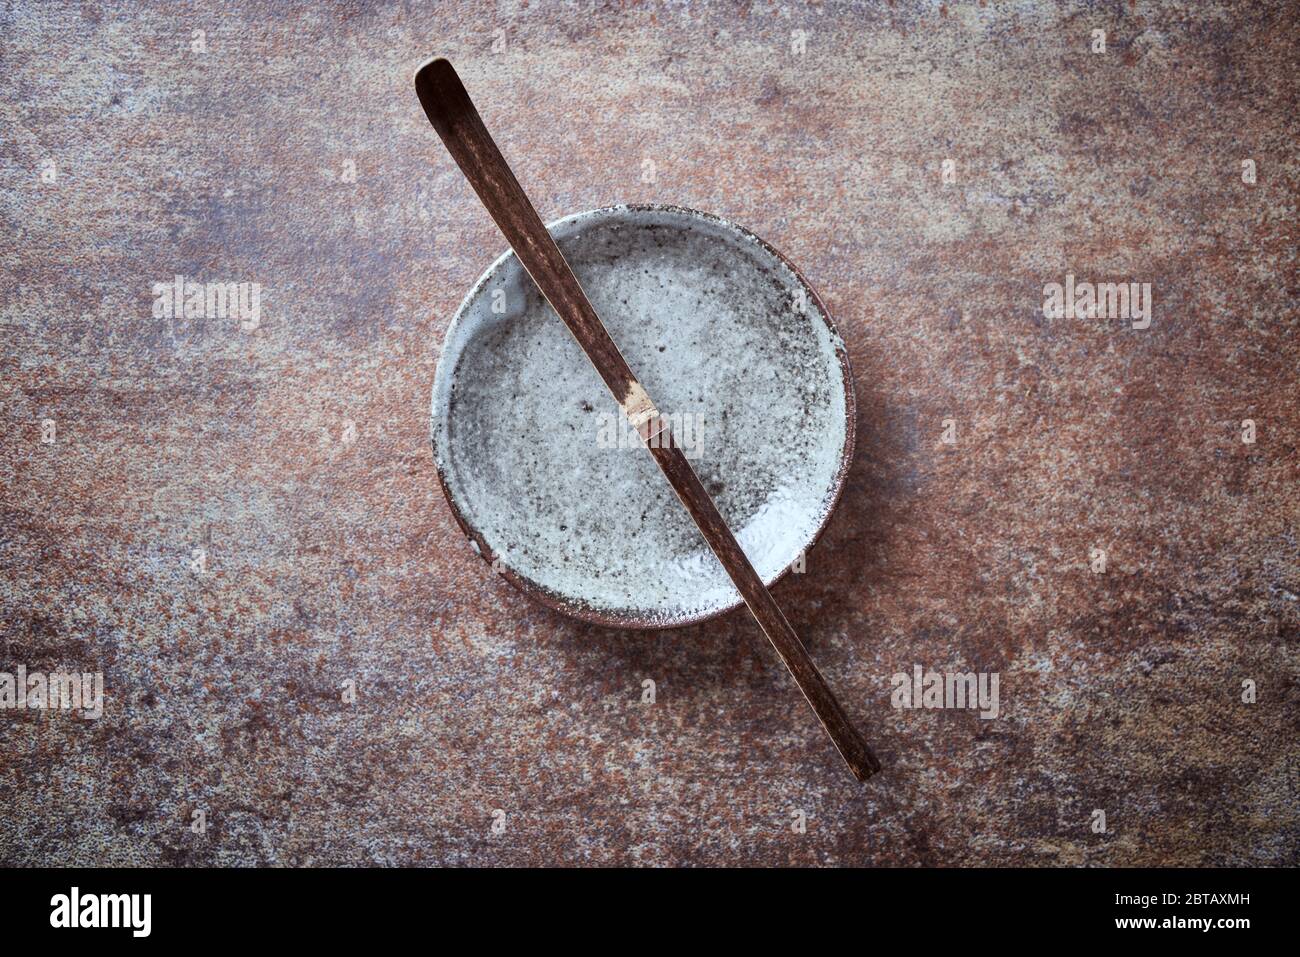 Chashaku Matcha spoon and empty ceramics plate on rustic stone background. Symbolic image. Asian culture. Top view. Copy space. Stock Photo